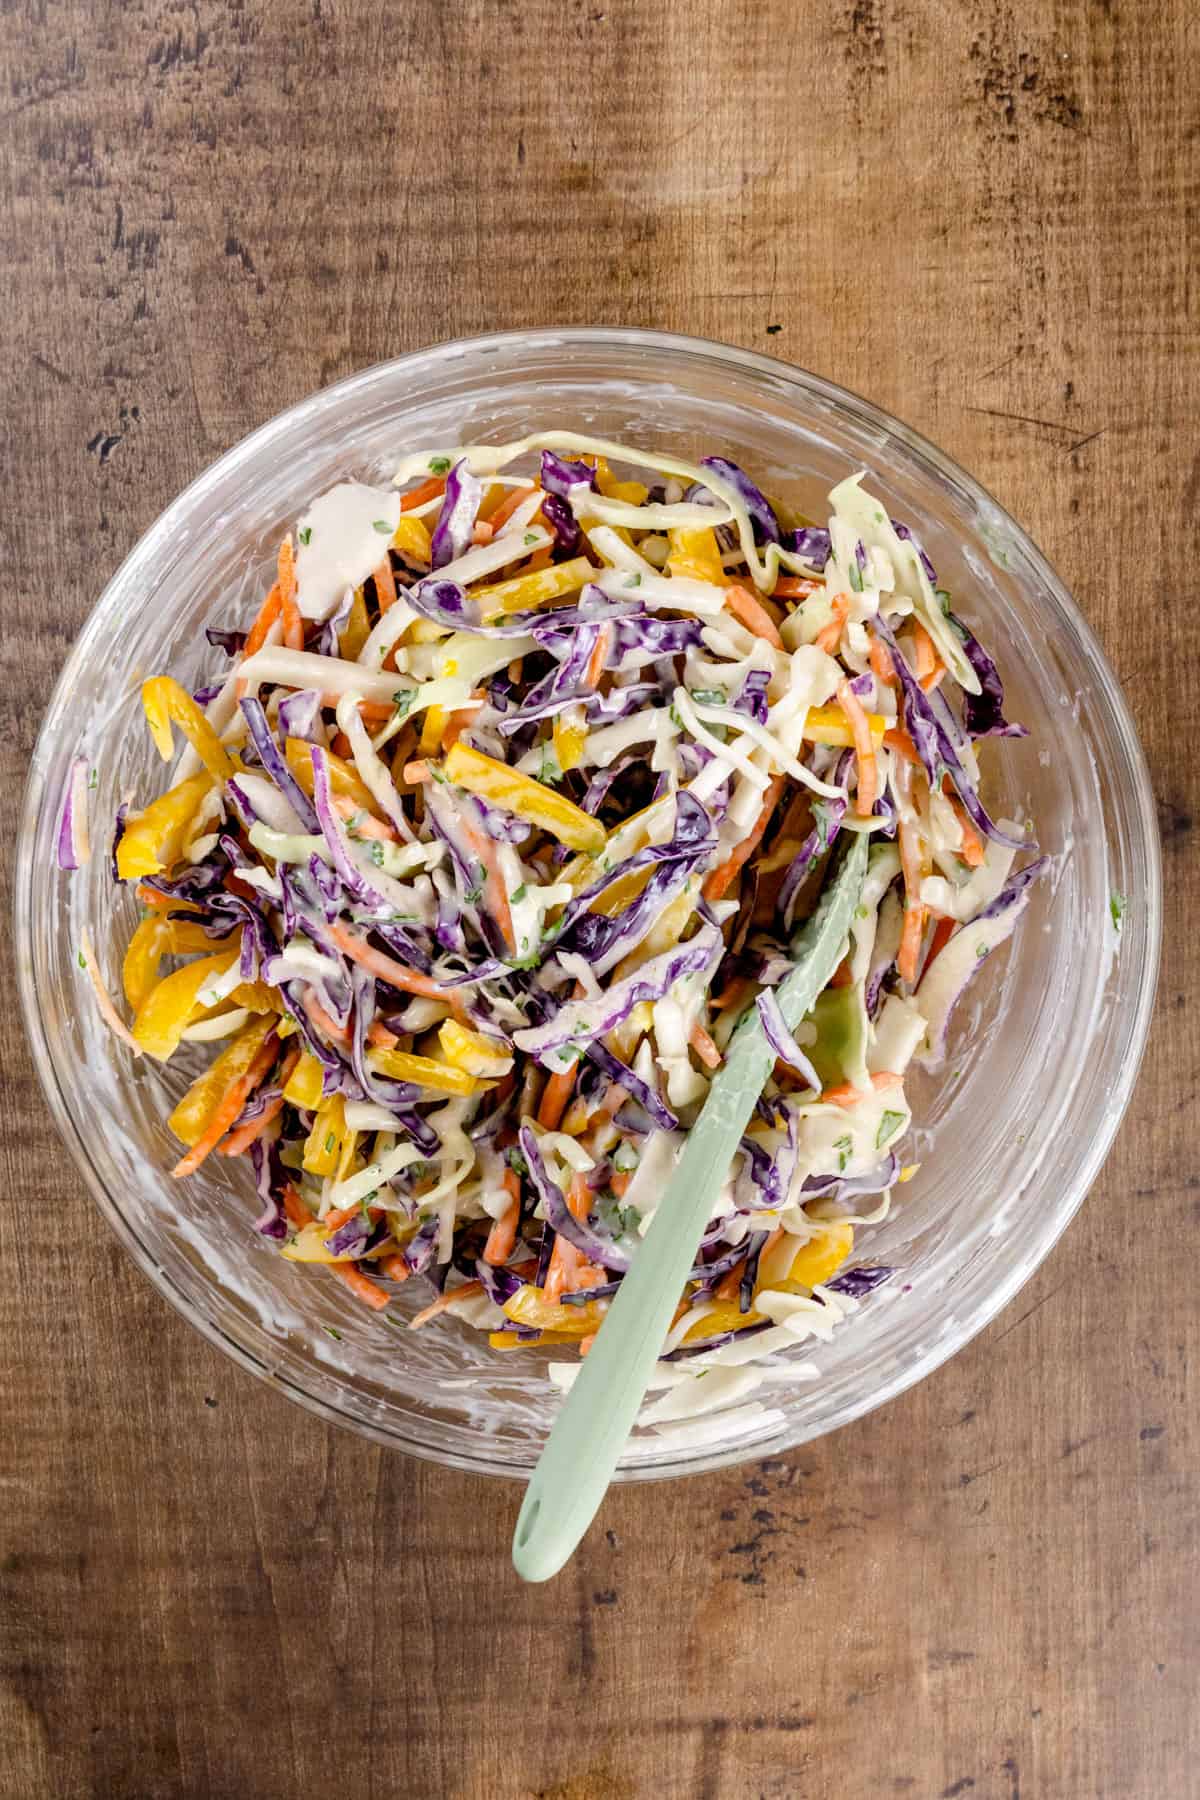 A glass bowl filled with the fully mixed coleslaw on a wood tabletop.